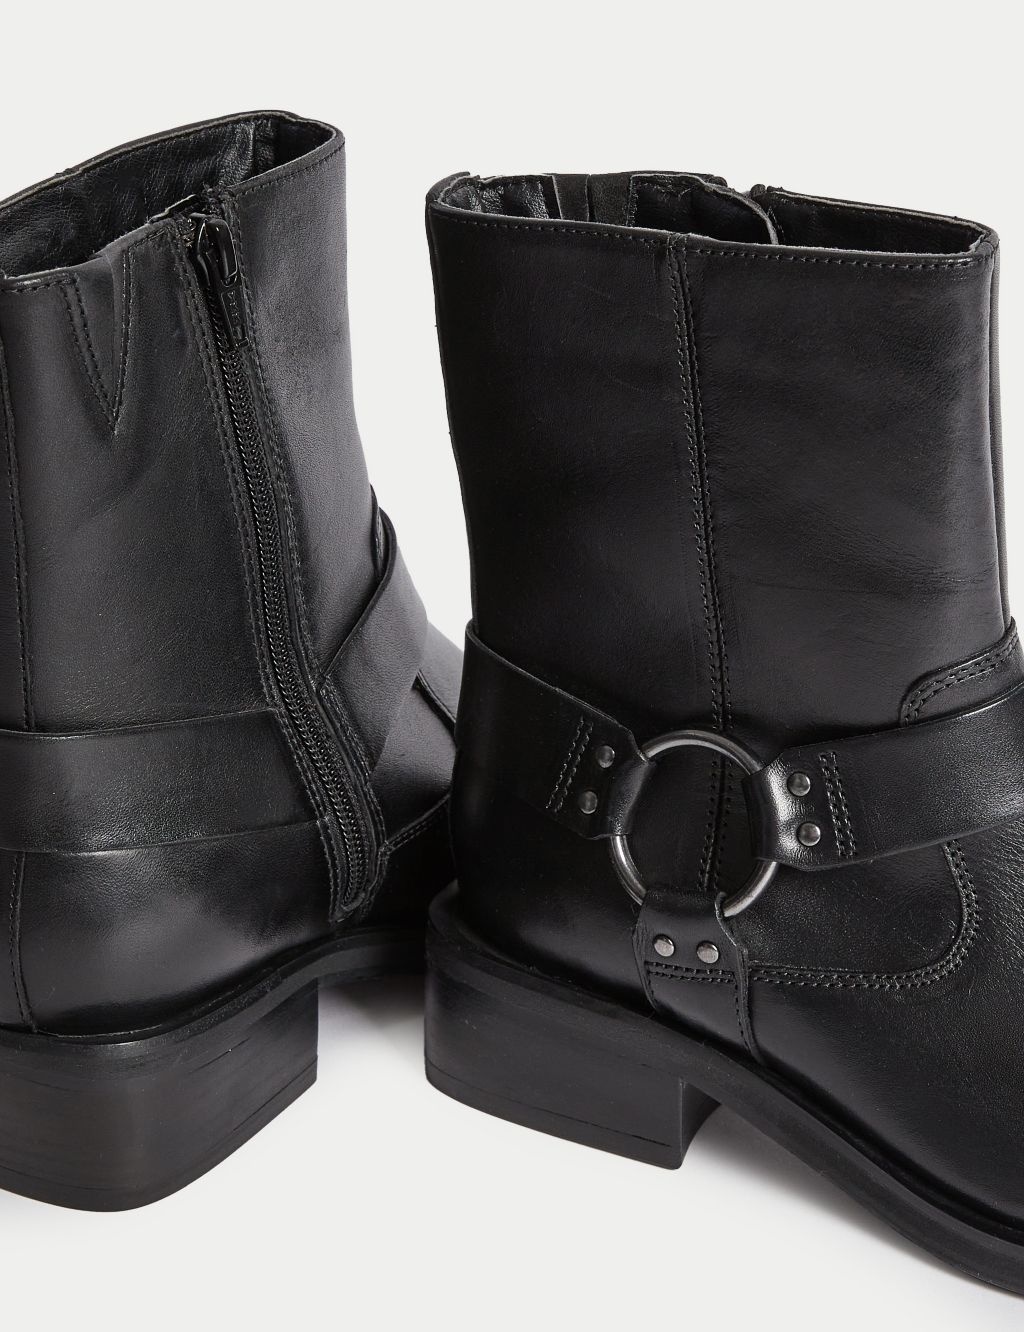 Leather Biker Flat Ankle Boots image 3